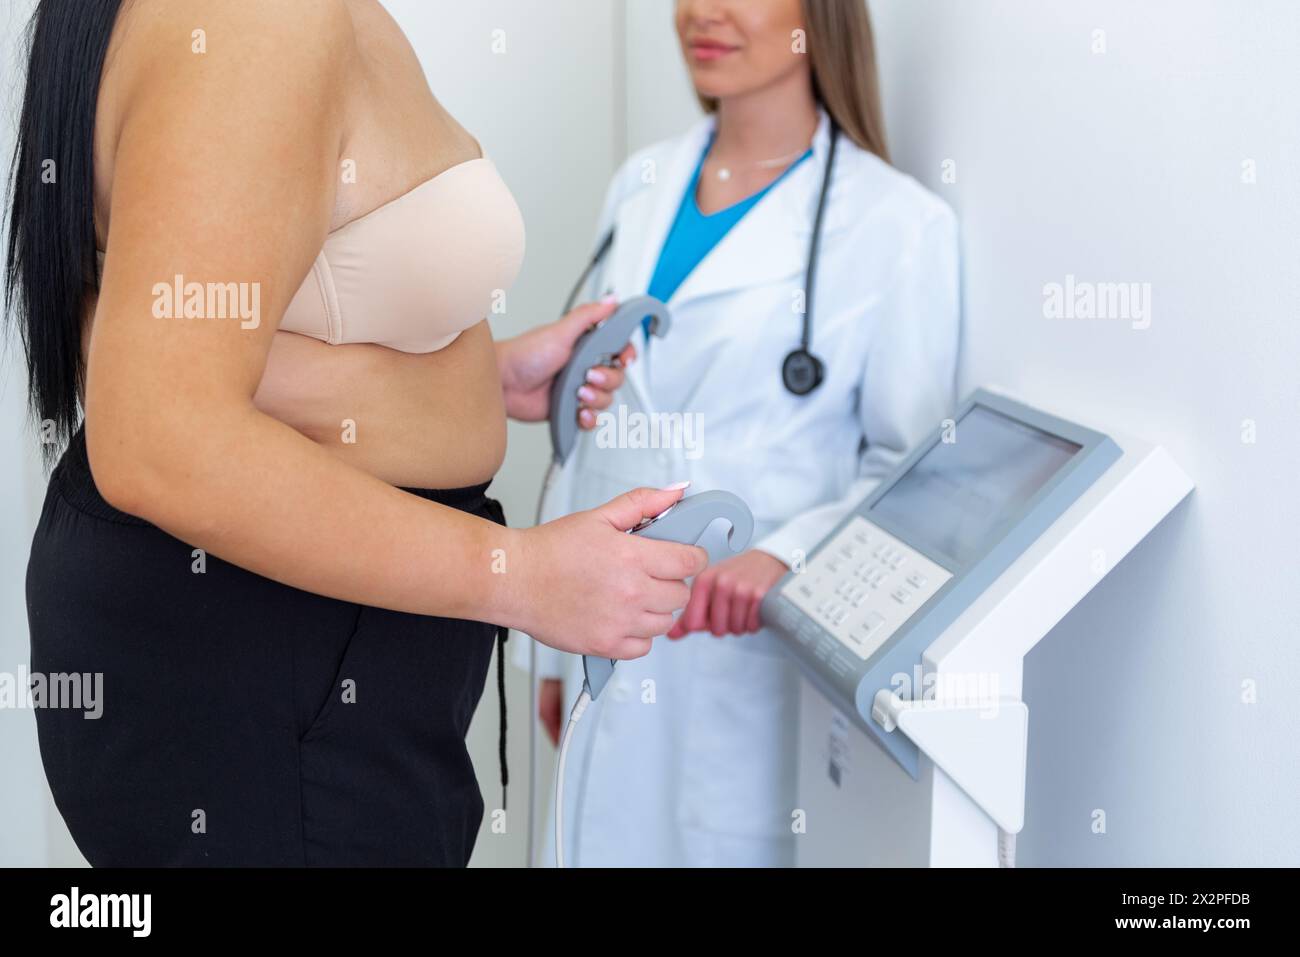 A health practitioner assists obese young woman with a body composition test using advanced equipment. Stock Photo